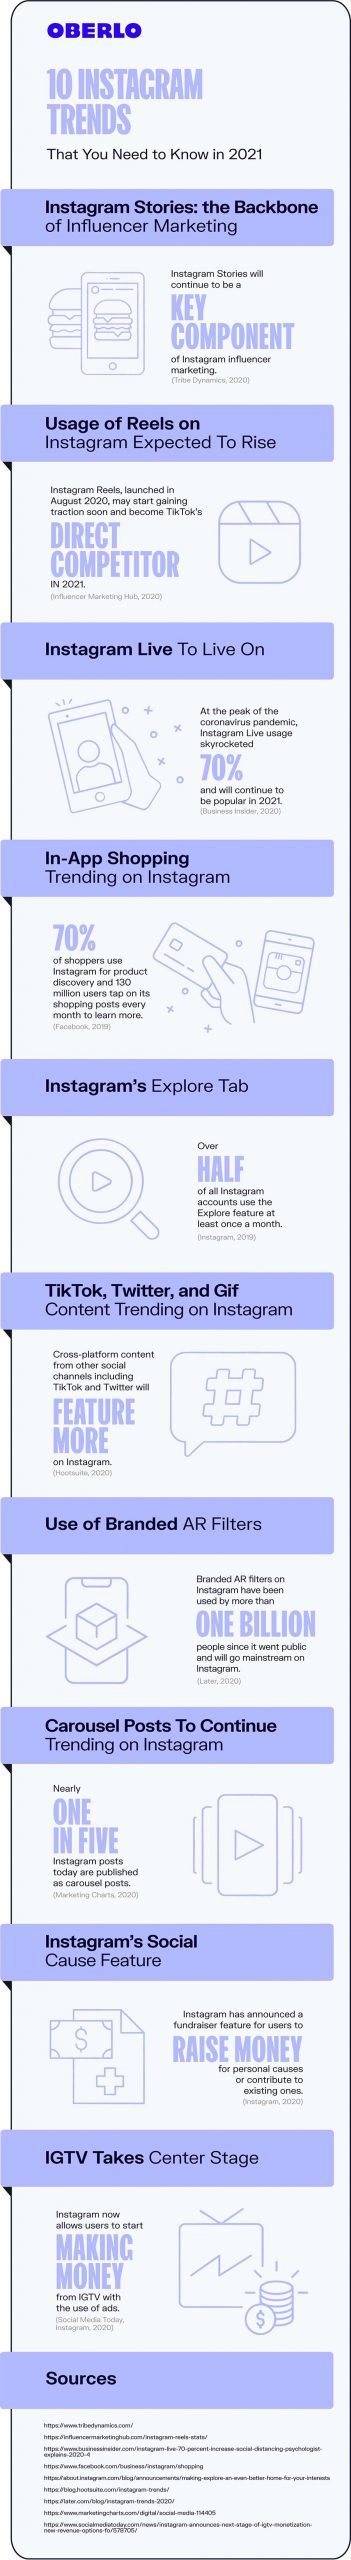 10 instagram trends you need to know in 2021 infographic scaled 1